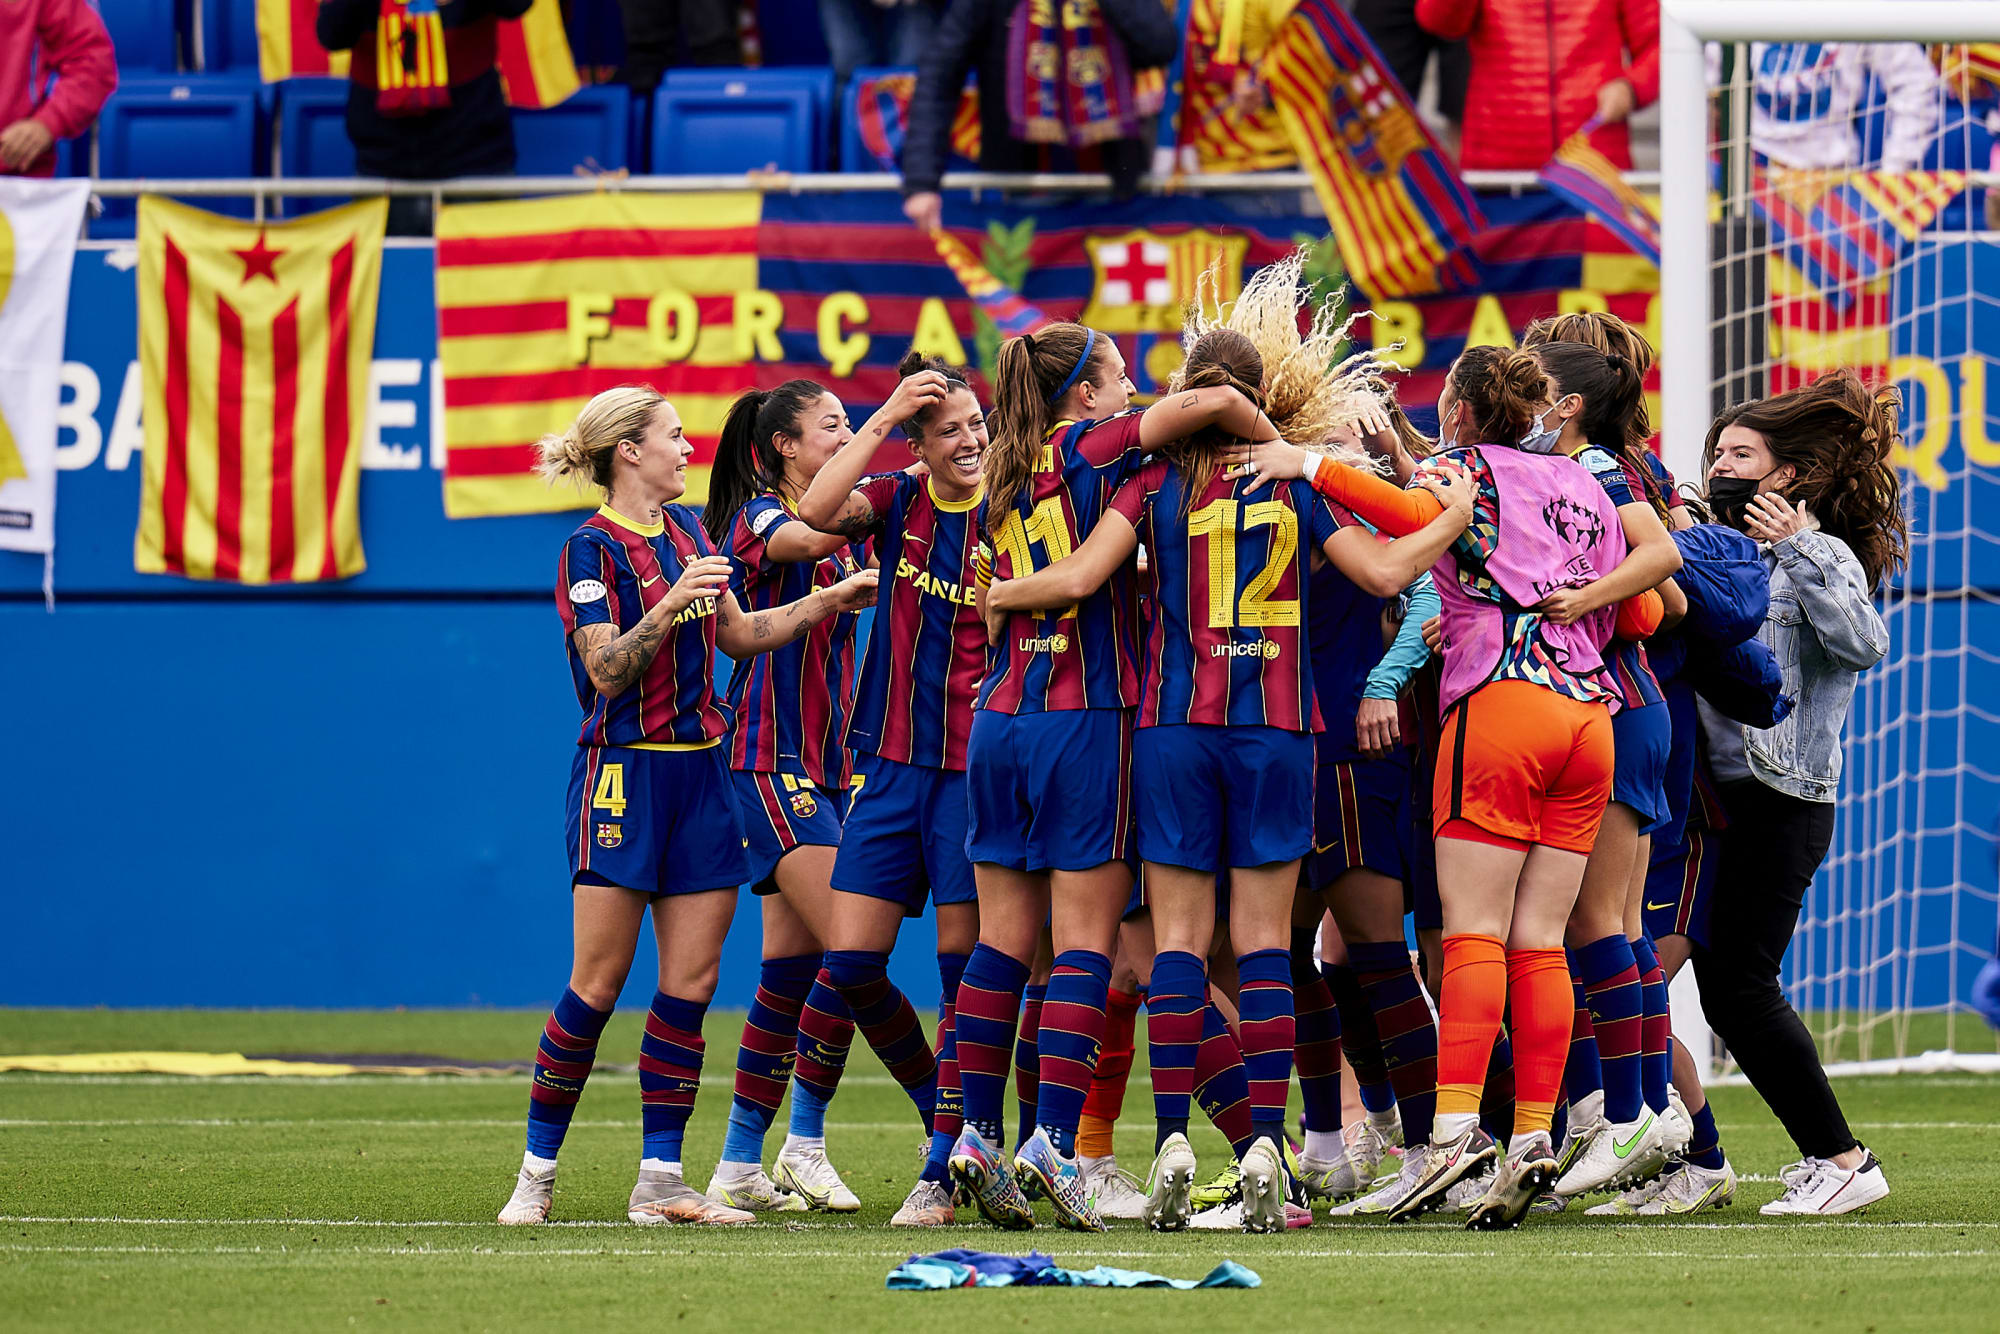 Barcelona Femeni Beat Psg To Face Chelsea In Champions League Final